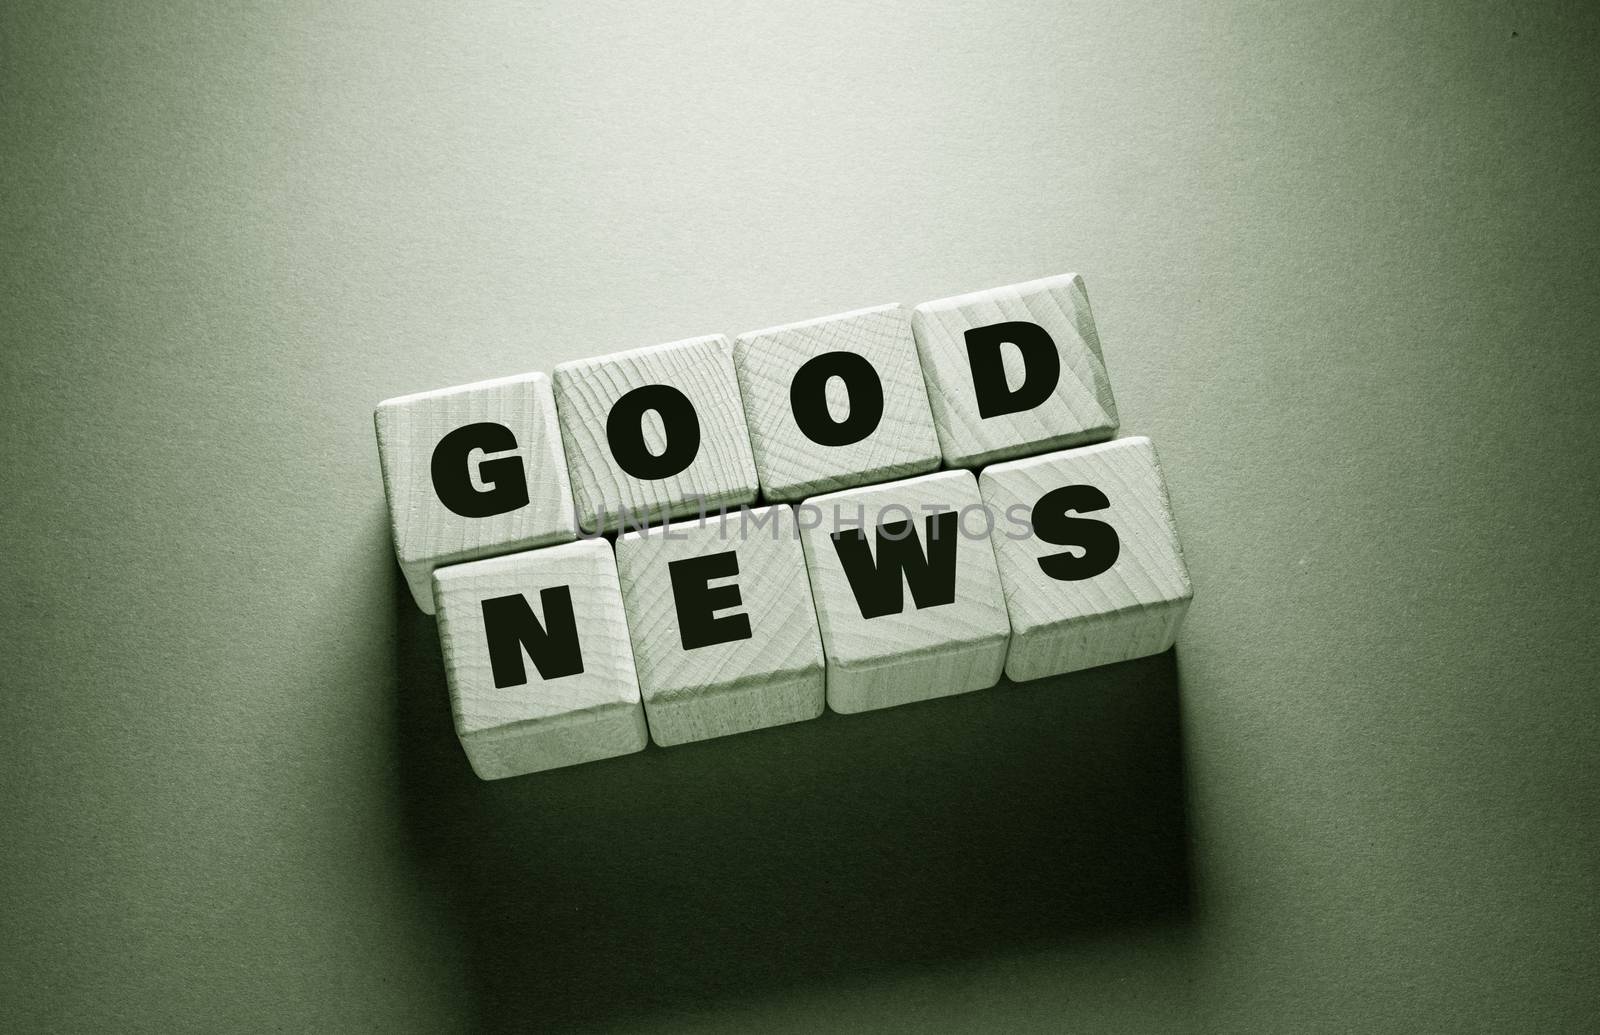 Good News Word with Wooden Cubes by Jievani